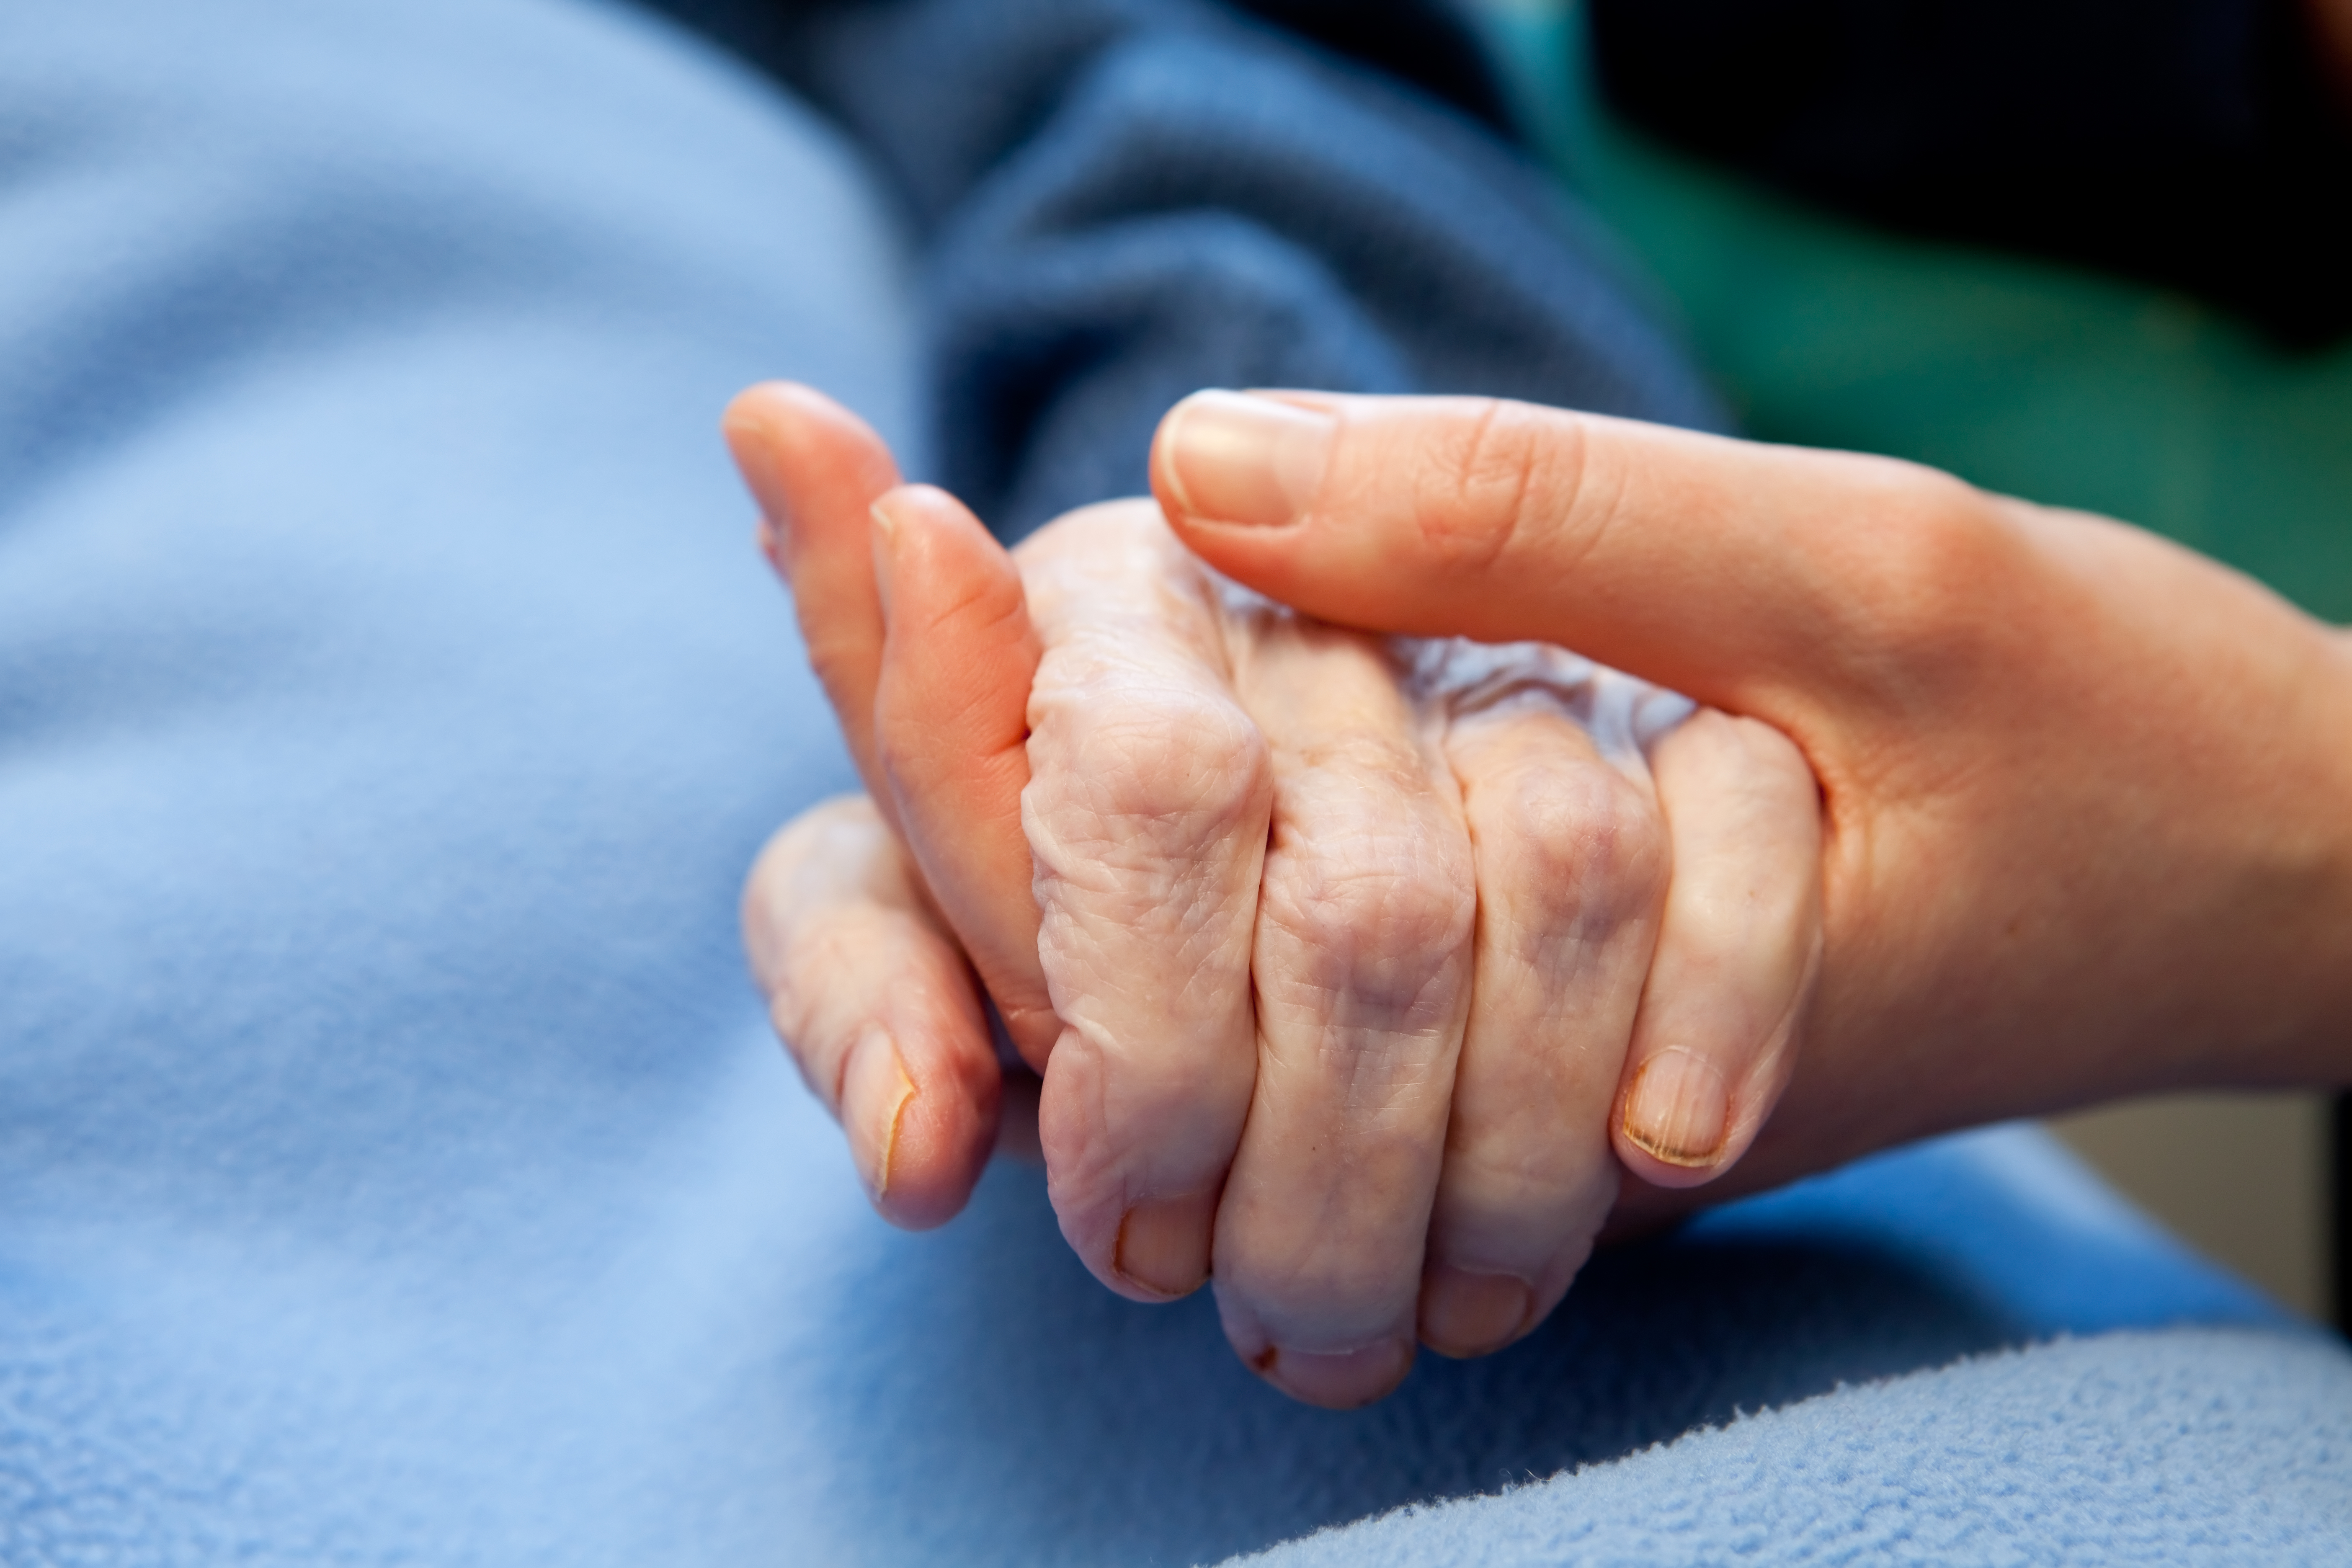 A young hand touches and holds an old wrinkled hand | Source: Shutterstock